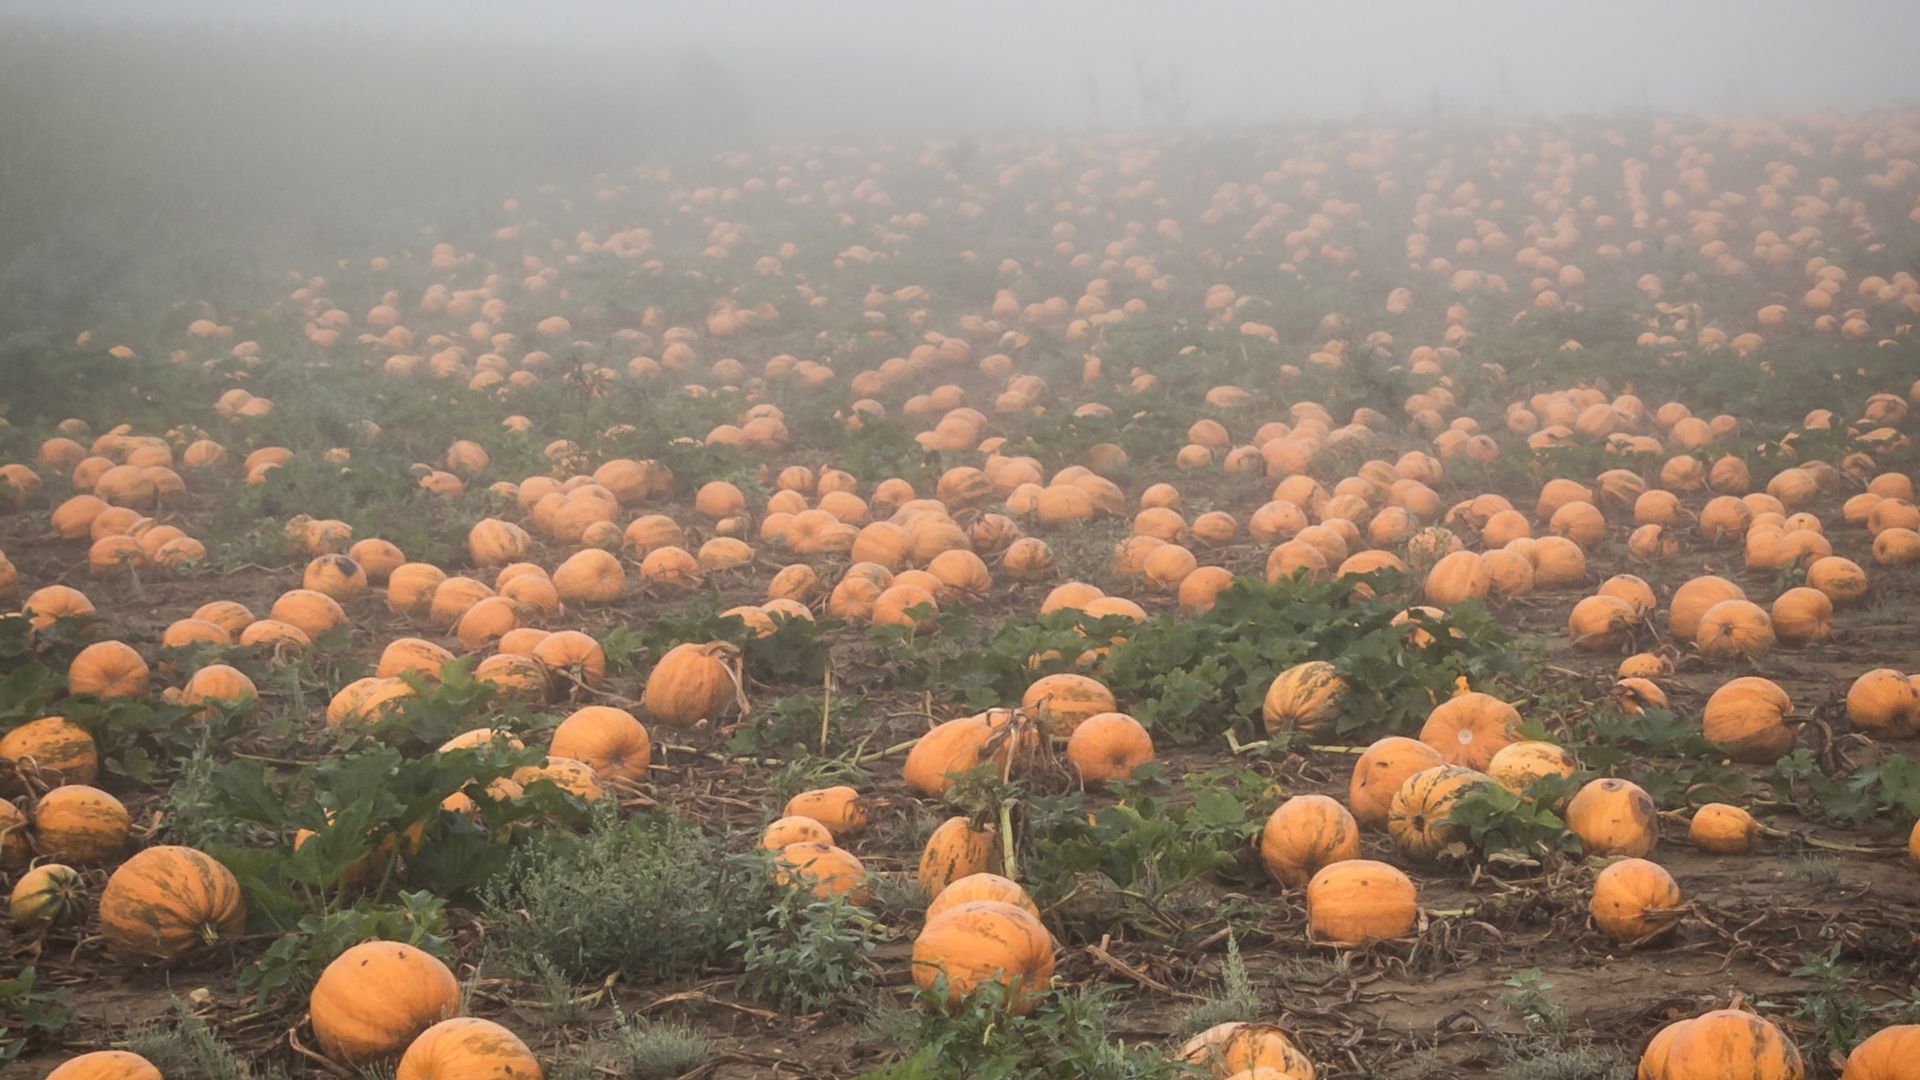 Hundreds of pumpkins growing in a foggy field.